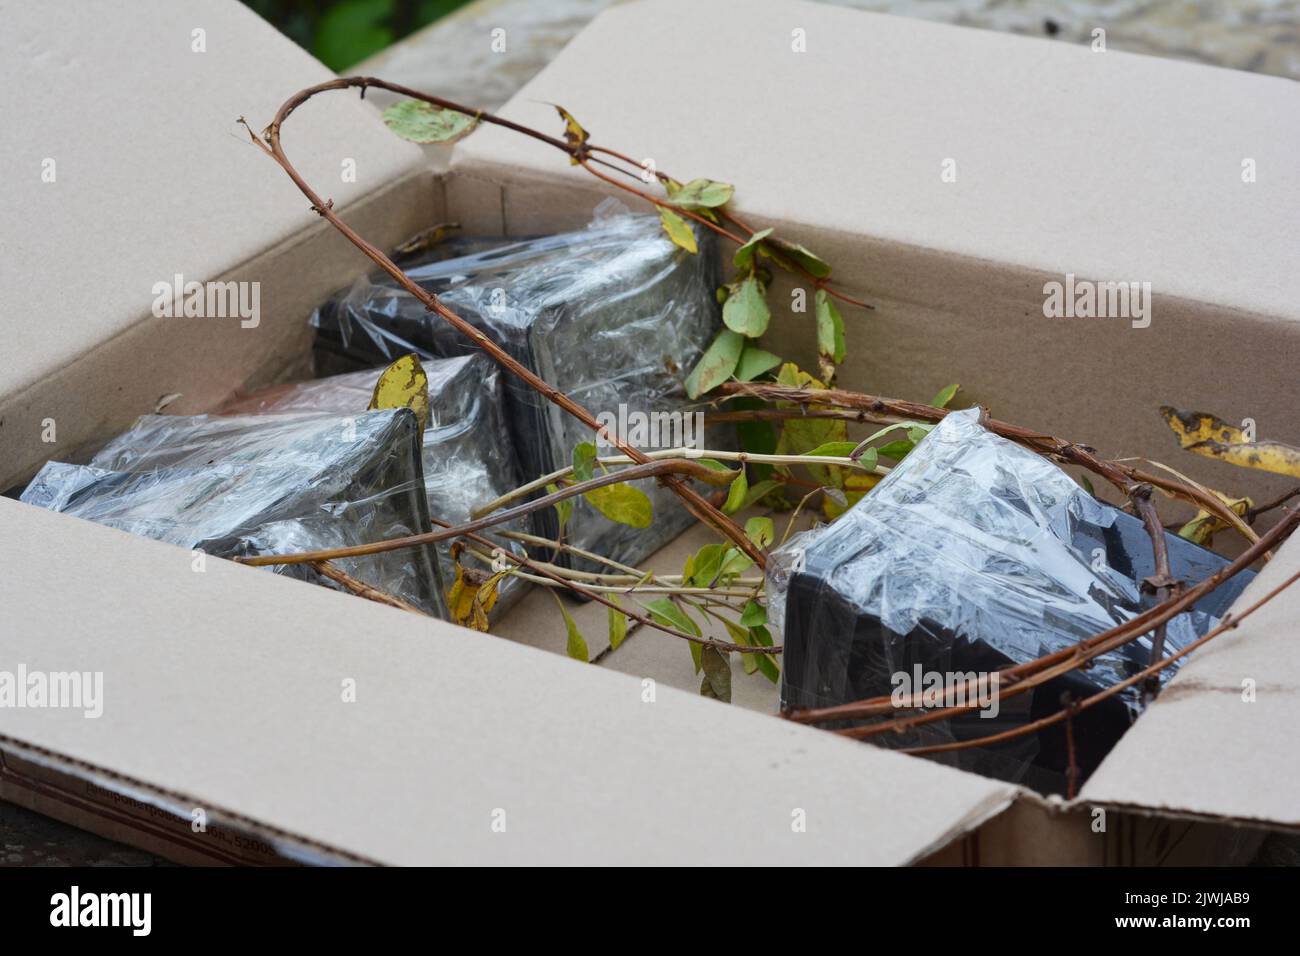 Shipping plant saplings in a carton box. Putting pots with plant saplings of blue honeysuckle or Lonicera caerulea, and Lycium barbarum in a box befor Stock Photo